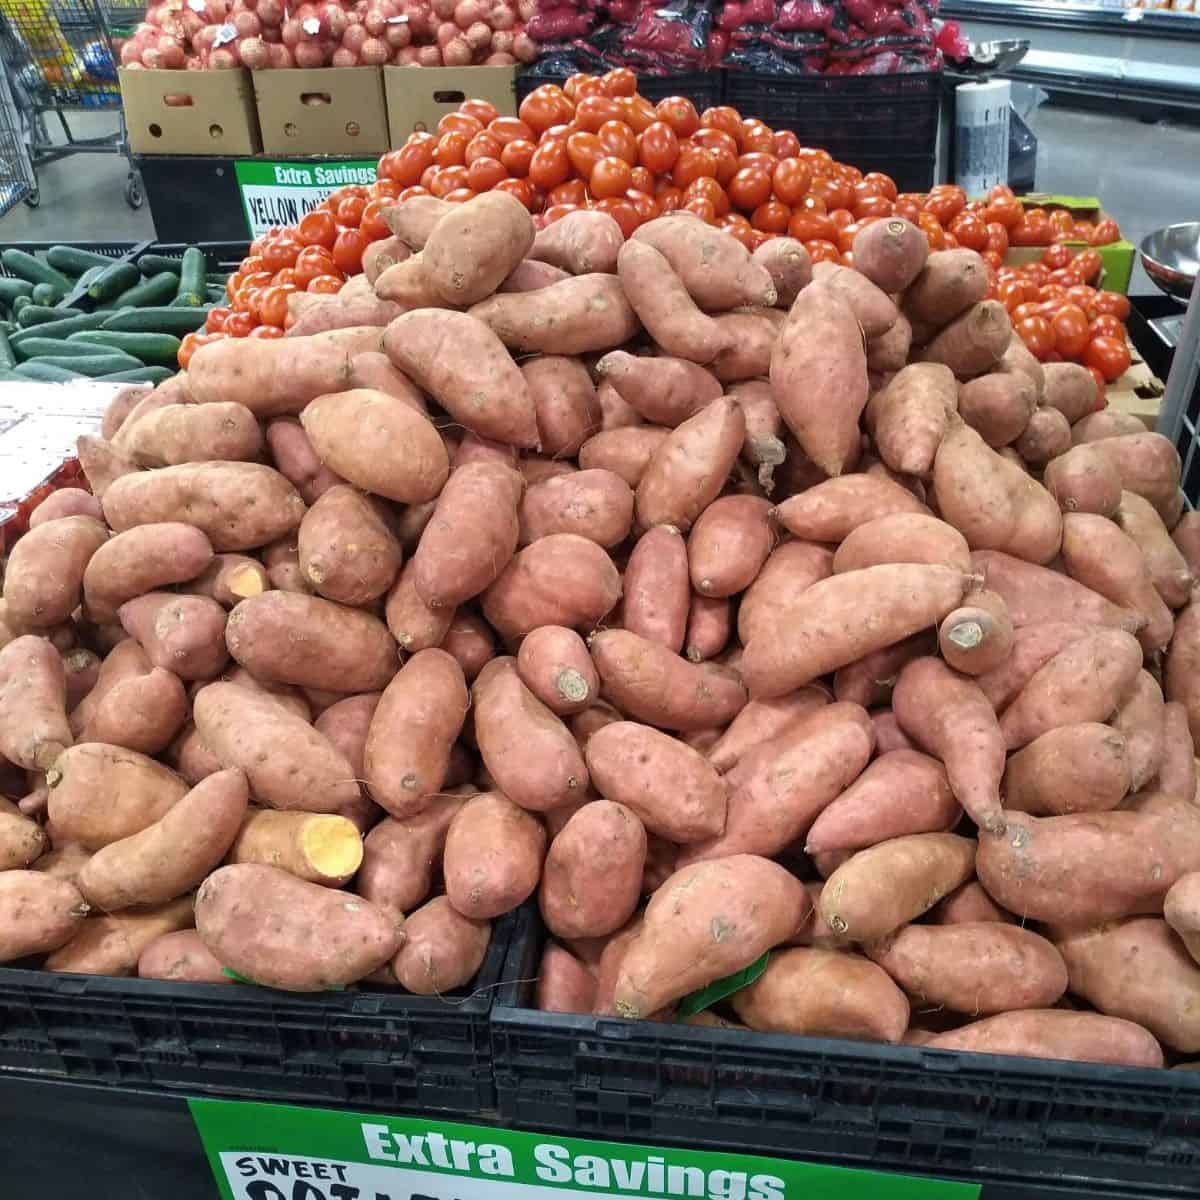 A huge display of sweet potatoes at a grocery tsore.